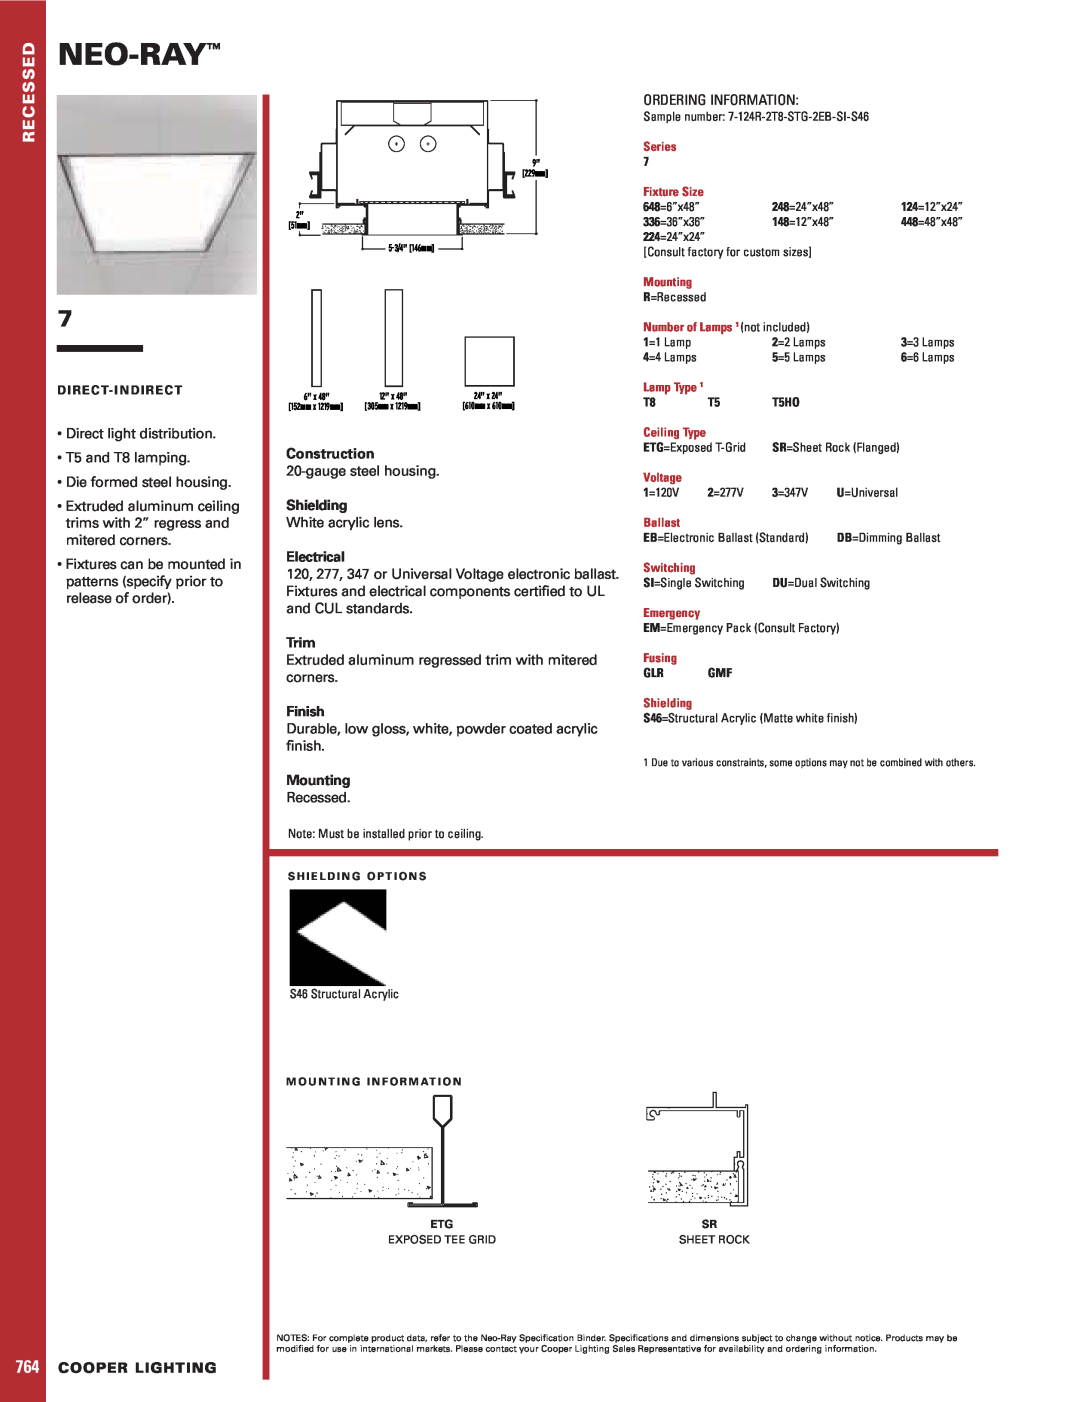 Cooper Lighting 7 specifications Neo-Ray, Construction, Shielding, Electrical, Trim, Finish, Mounting, Cooper Lighting 